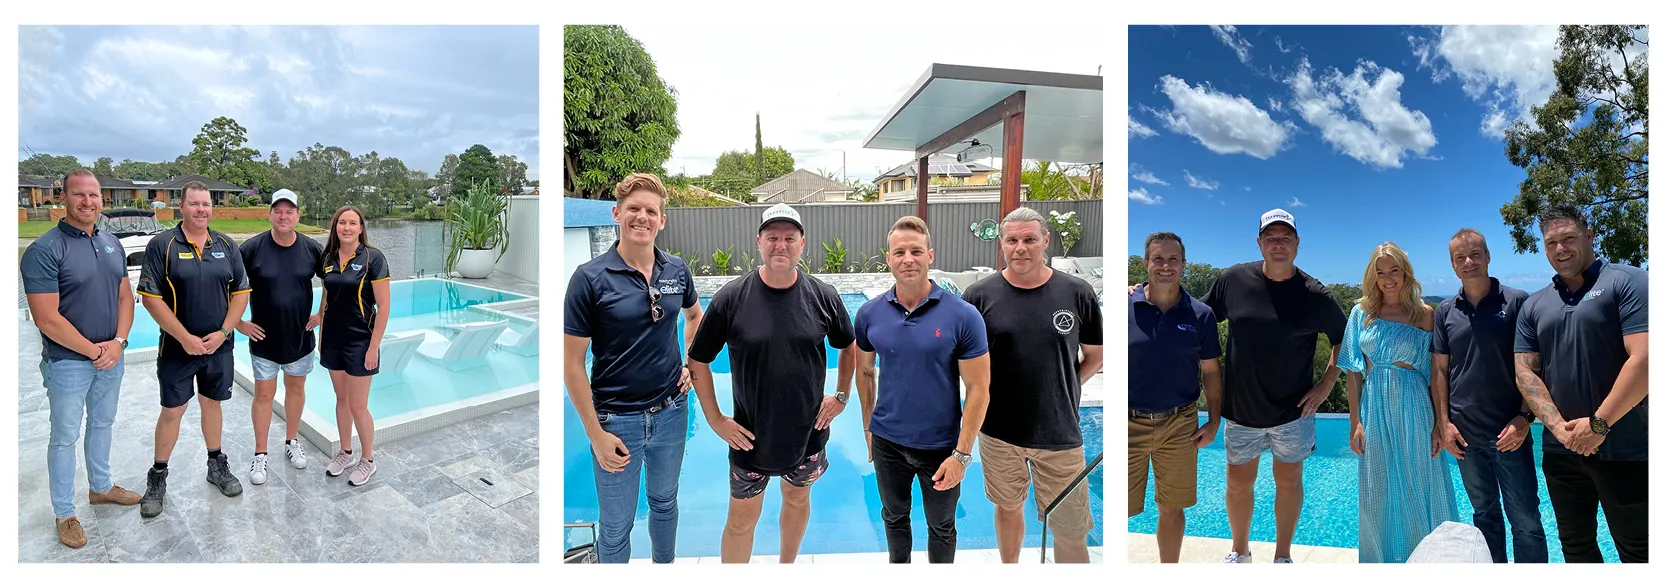 Australias Best Pools hosts with Maytronics staff filming on location